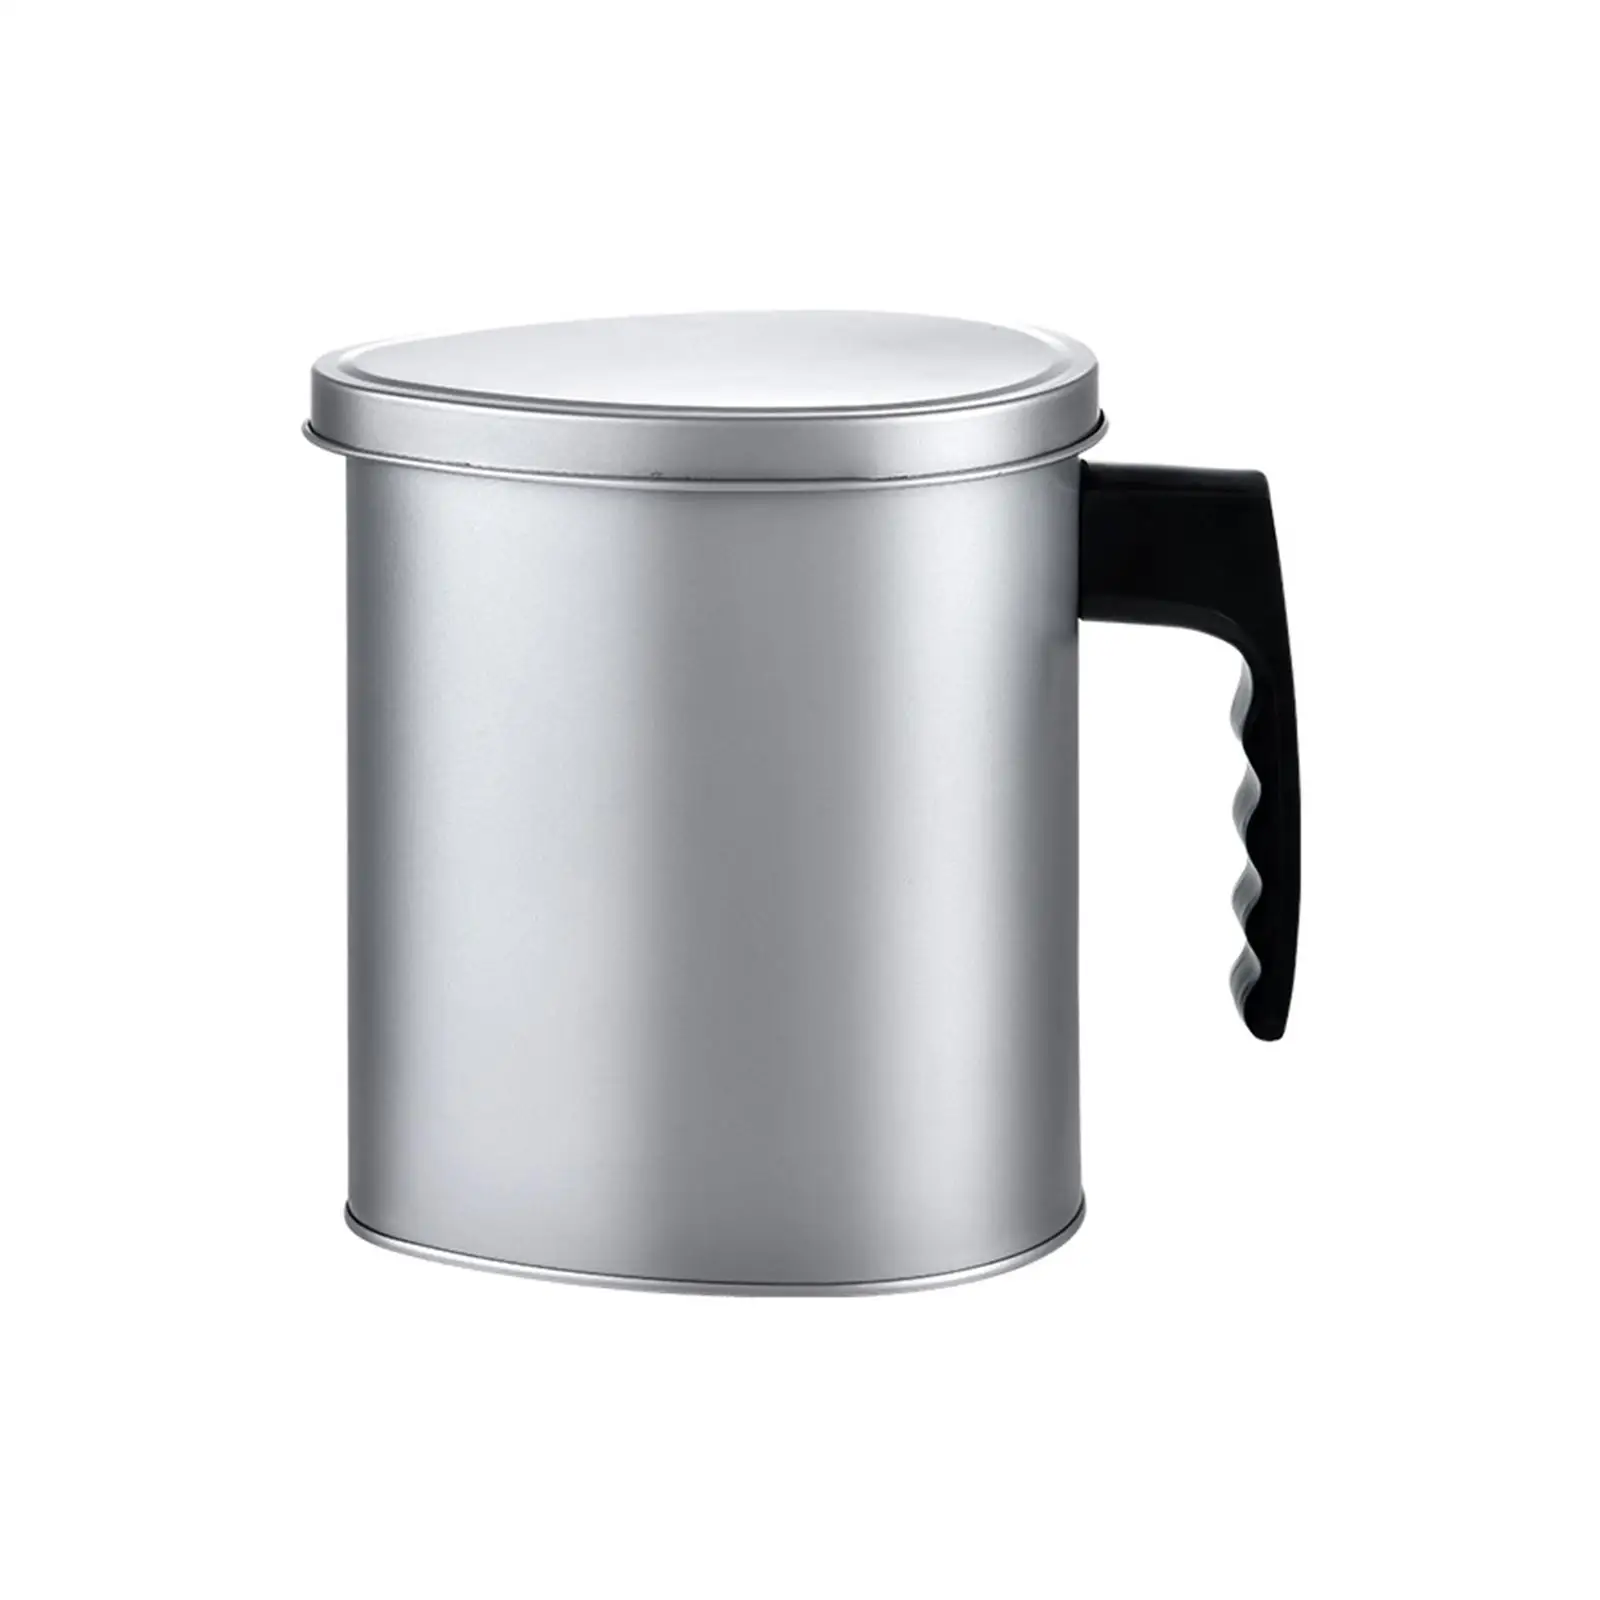 Cooking Oil Filter Pot 1.3L Oil Storage Can for Kitchen Restaurant Cooking